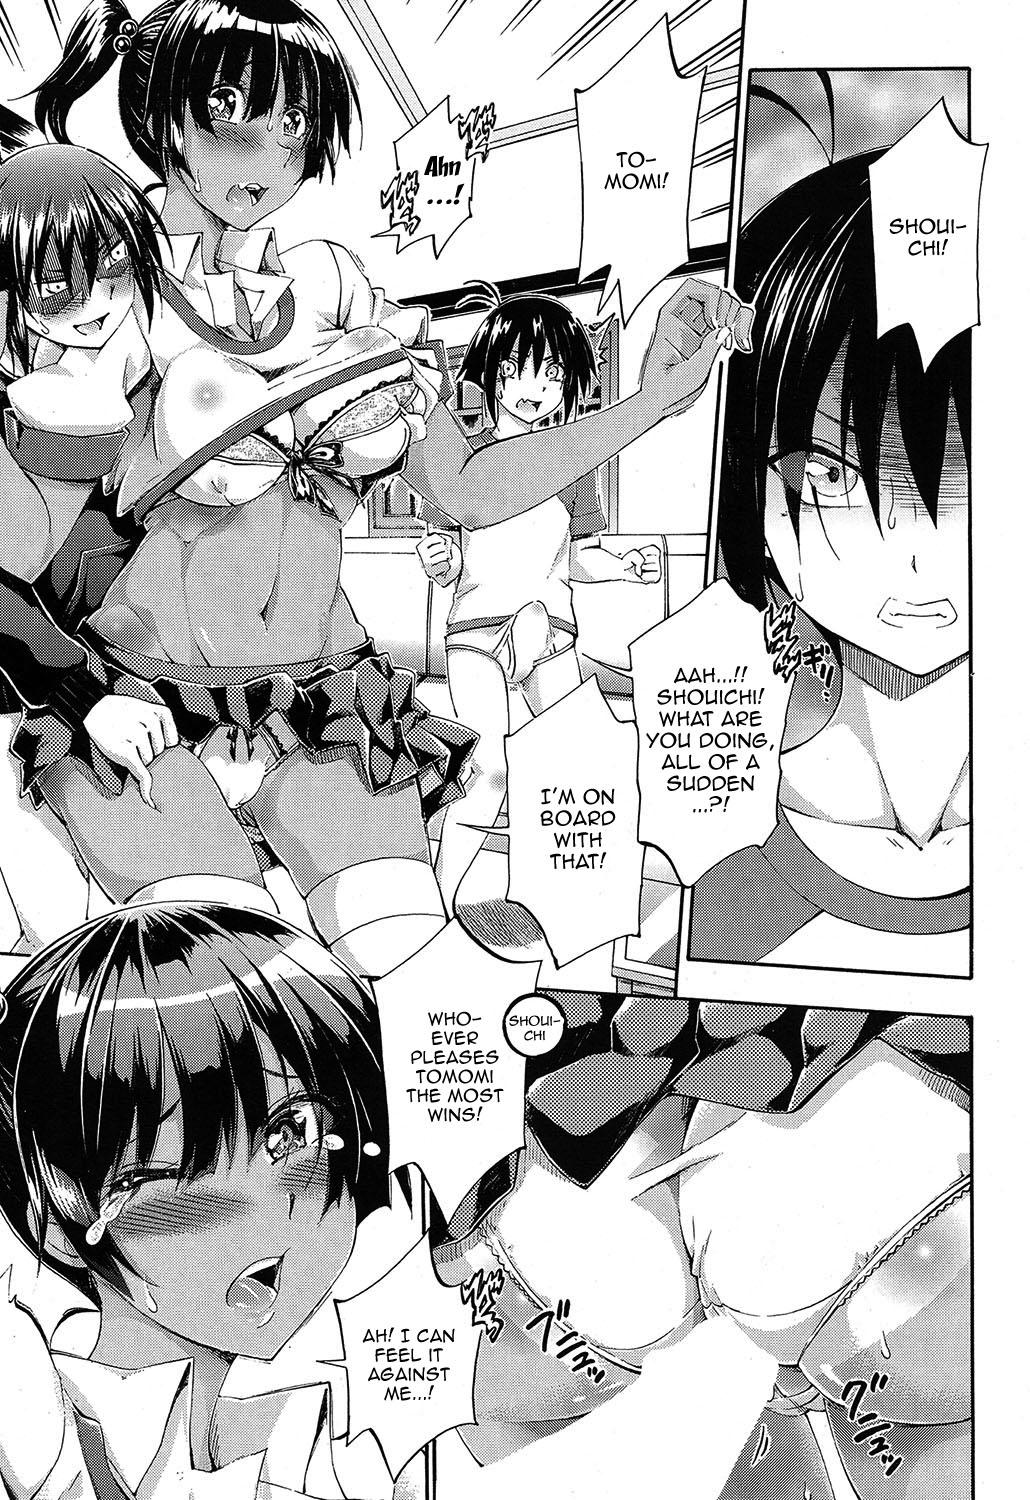 Mulata Doppel wa Onee-chan to H Shitai! Ch. 4 | My Doppelganger Wants To Have Sex With My Older Sister Ch. 4 Pendeja - Page 5